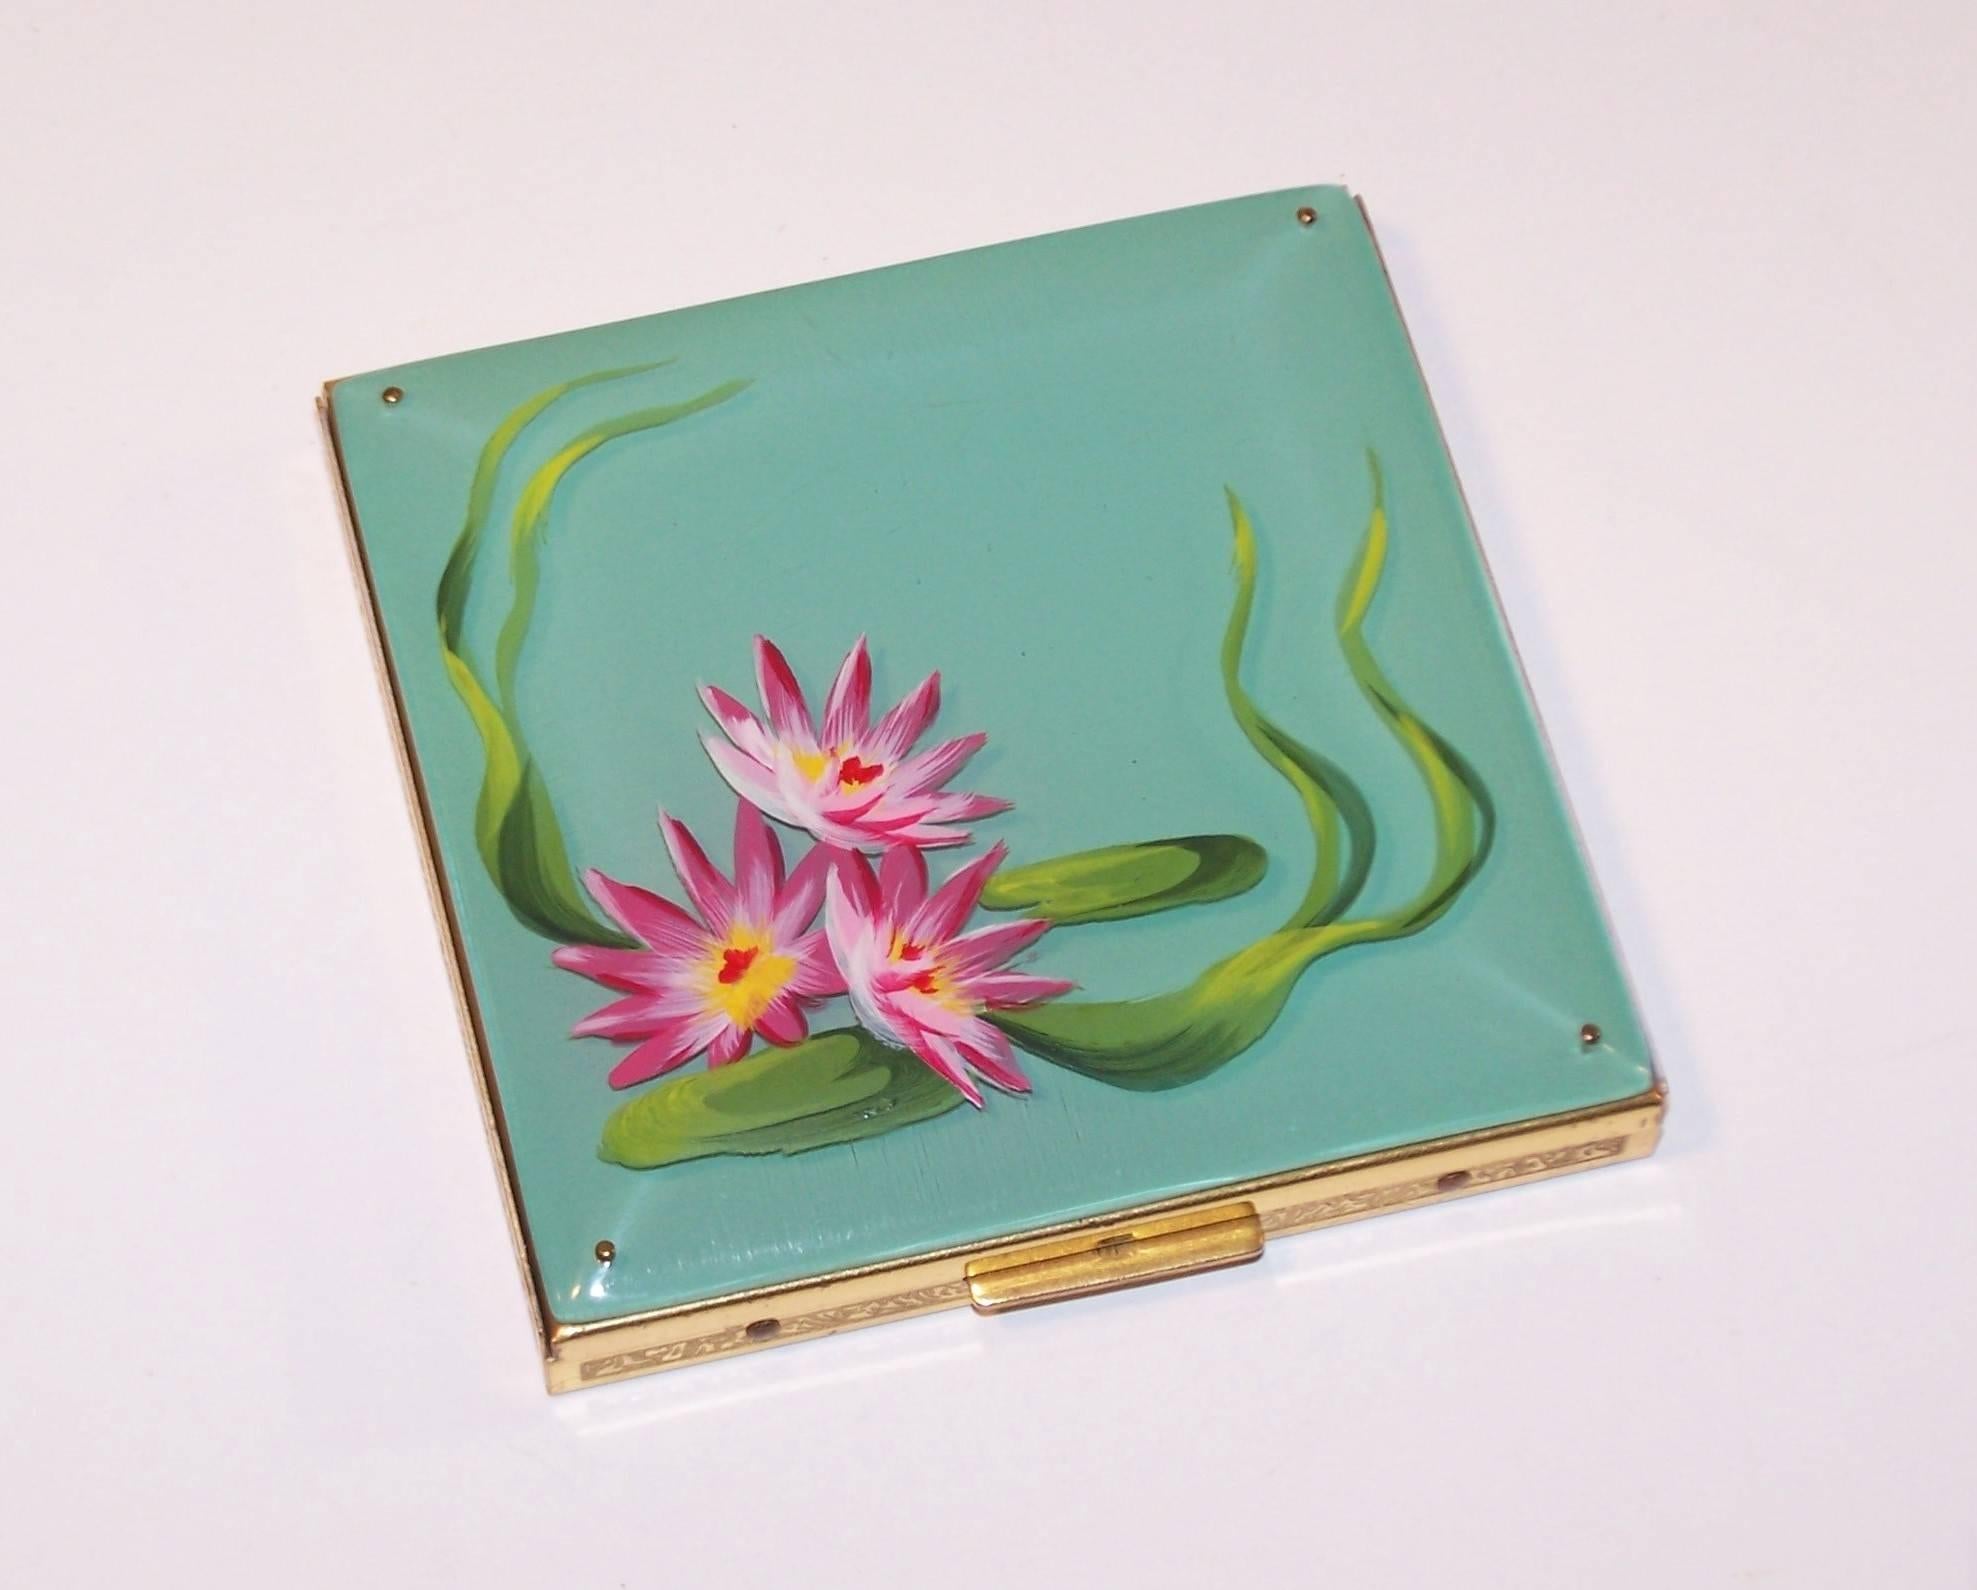 This lucite compact by Rex of Fifth Avenue is mesmerizing.  The colors and 3-D effect of the lucite with reverse paint to the underside and hand painted floral imagery on the top side create a glow that make this mirrored powder compact more